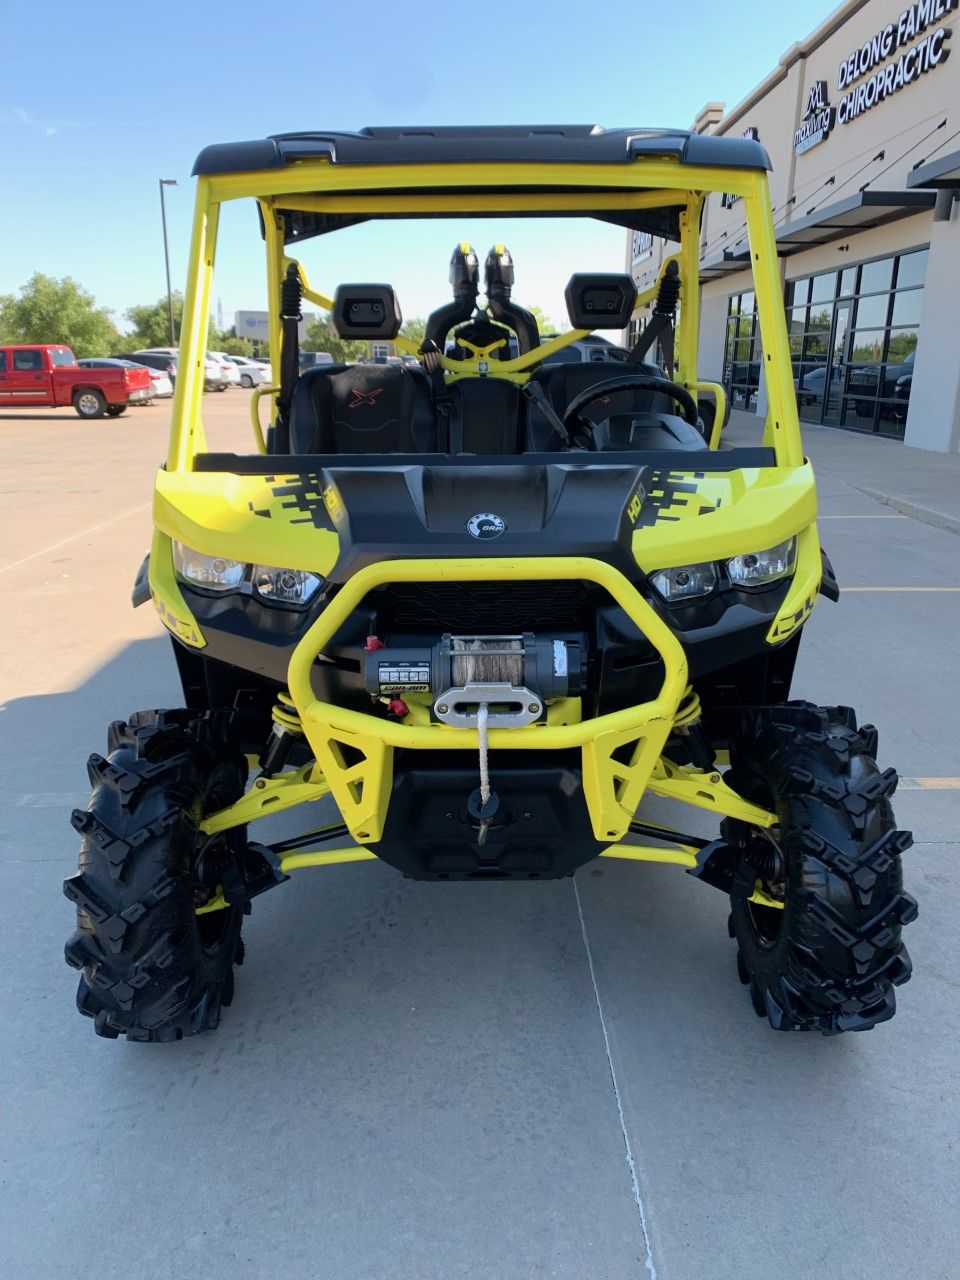 2019 Can-Am Defender X mr HD10 in Norman, Oklahoma - Photo 3